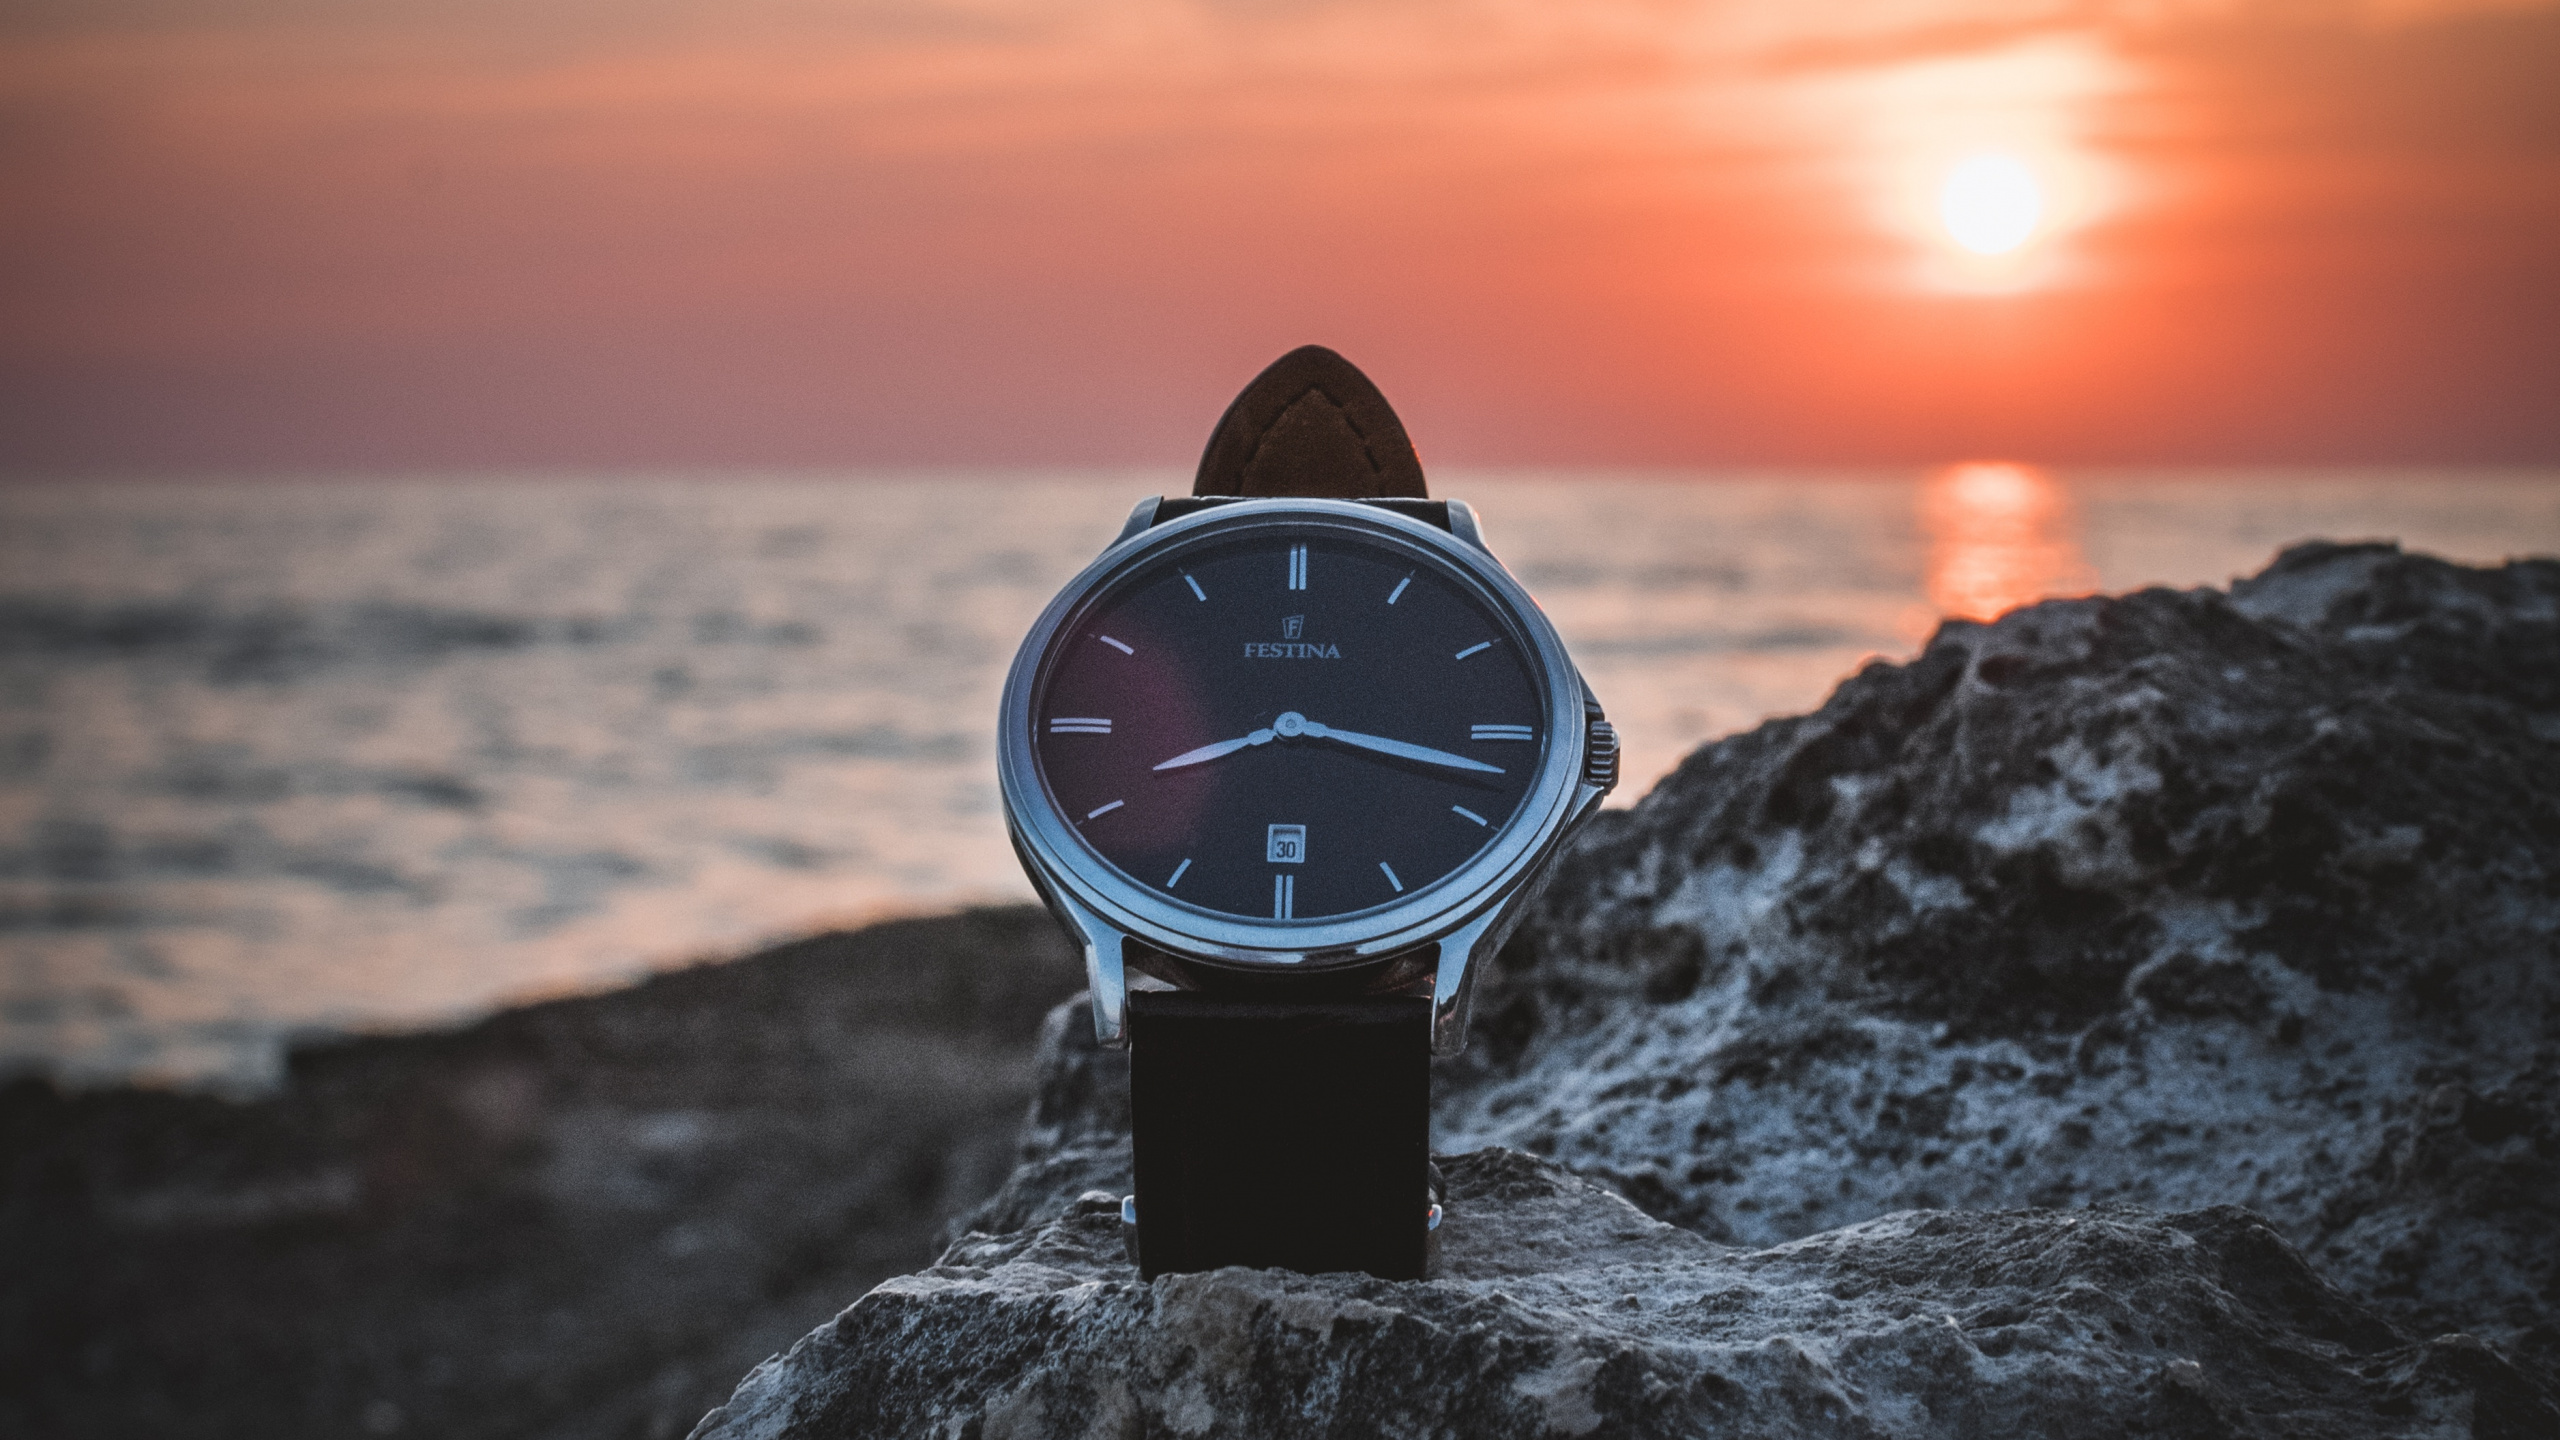 Black and White Analog Watch on Gray Rock Near Sea During Sunset. Wallpaper in 2560x1440 Resolution